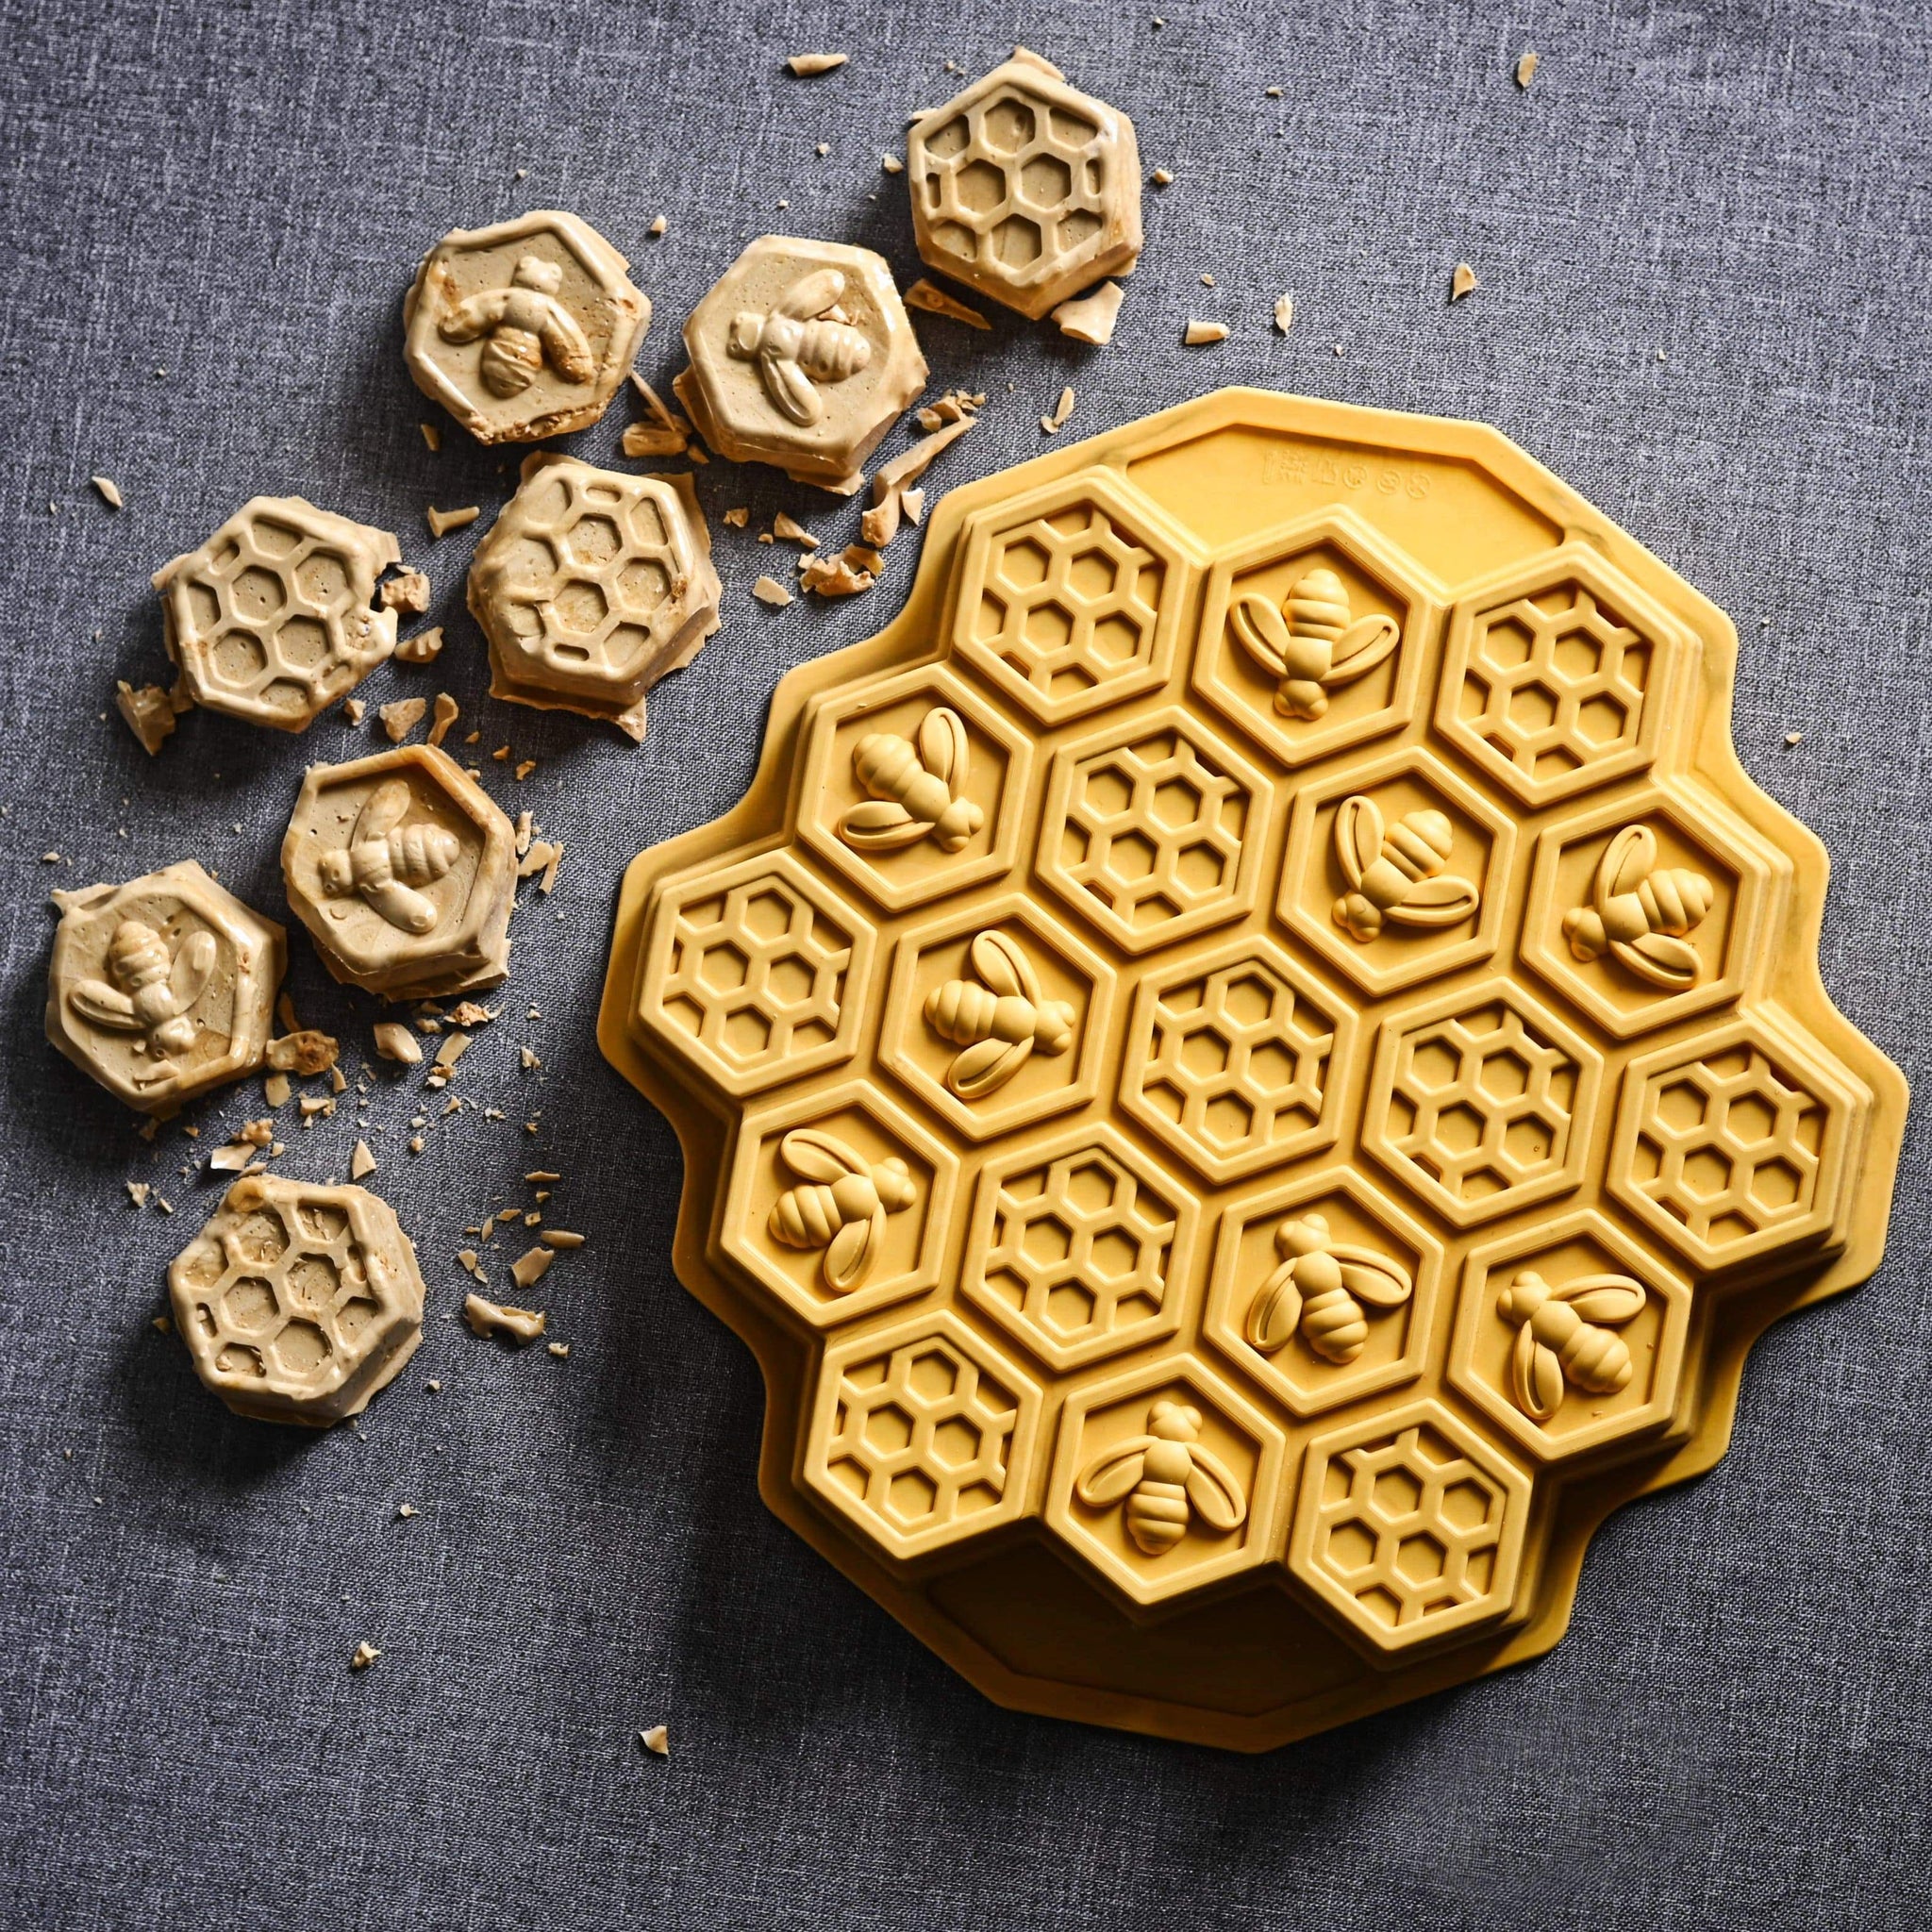 Thermomix Honeycomb Mould